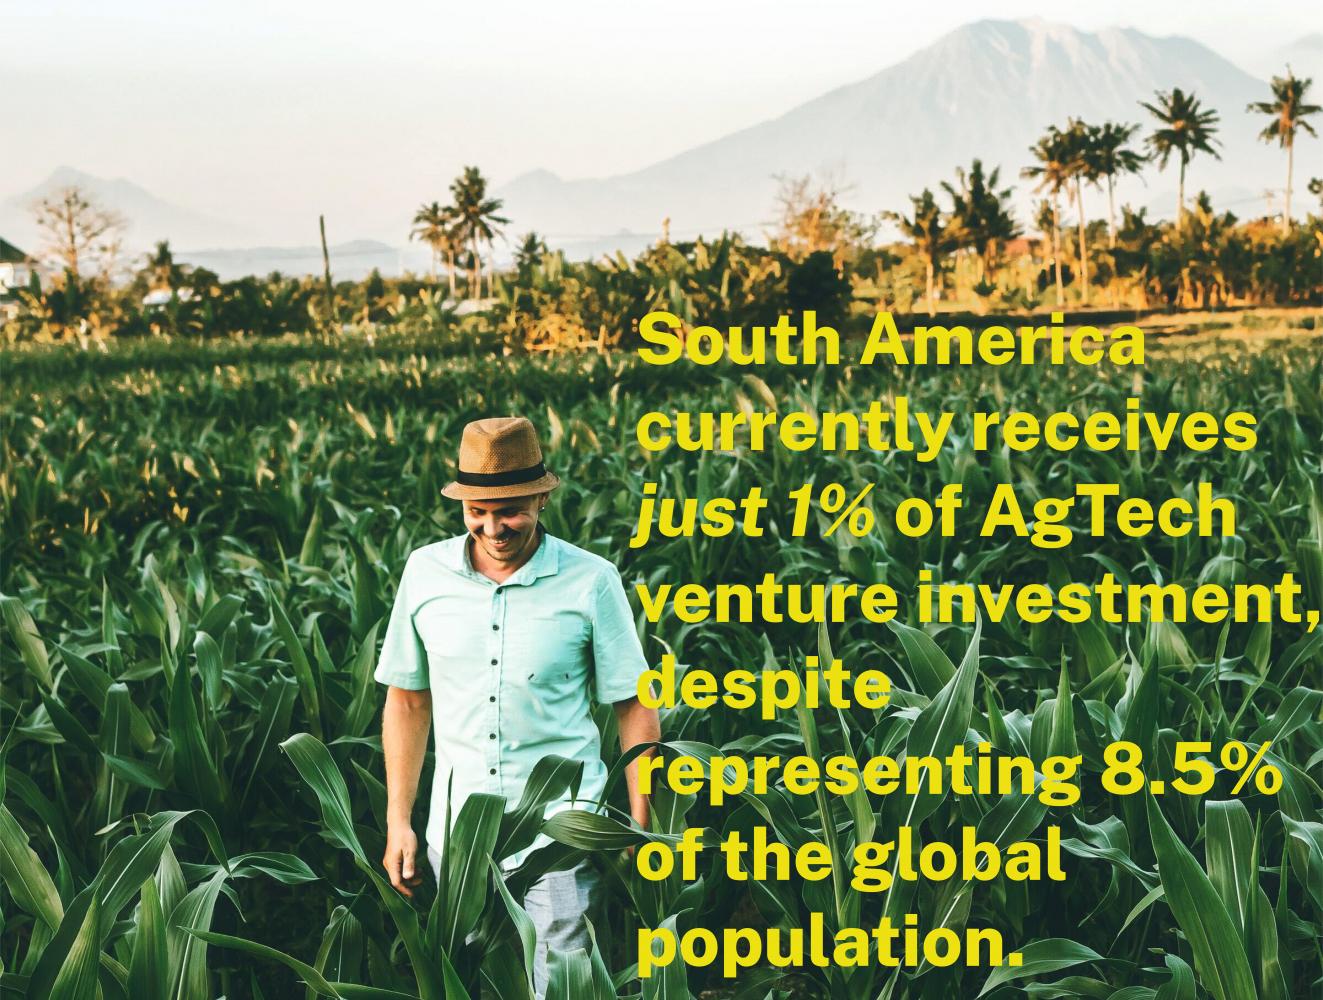 South America currently receives just 1% of AgTech venture investment despite representing 8.5% of thew global population.